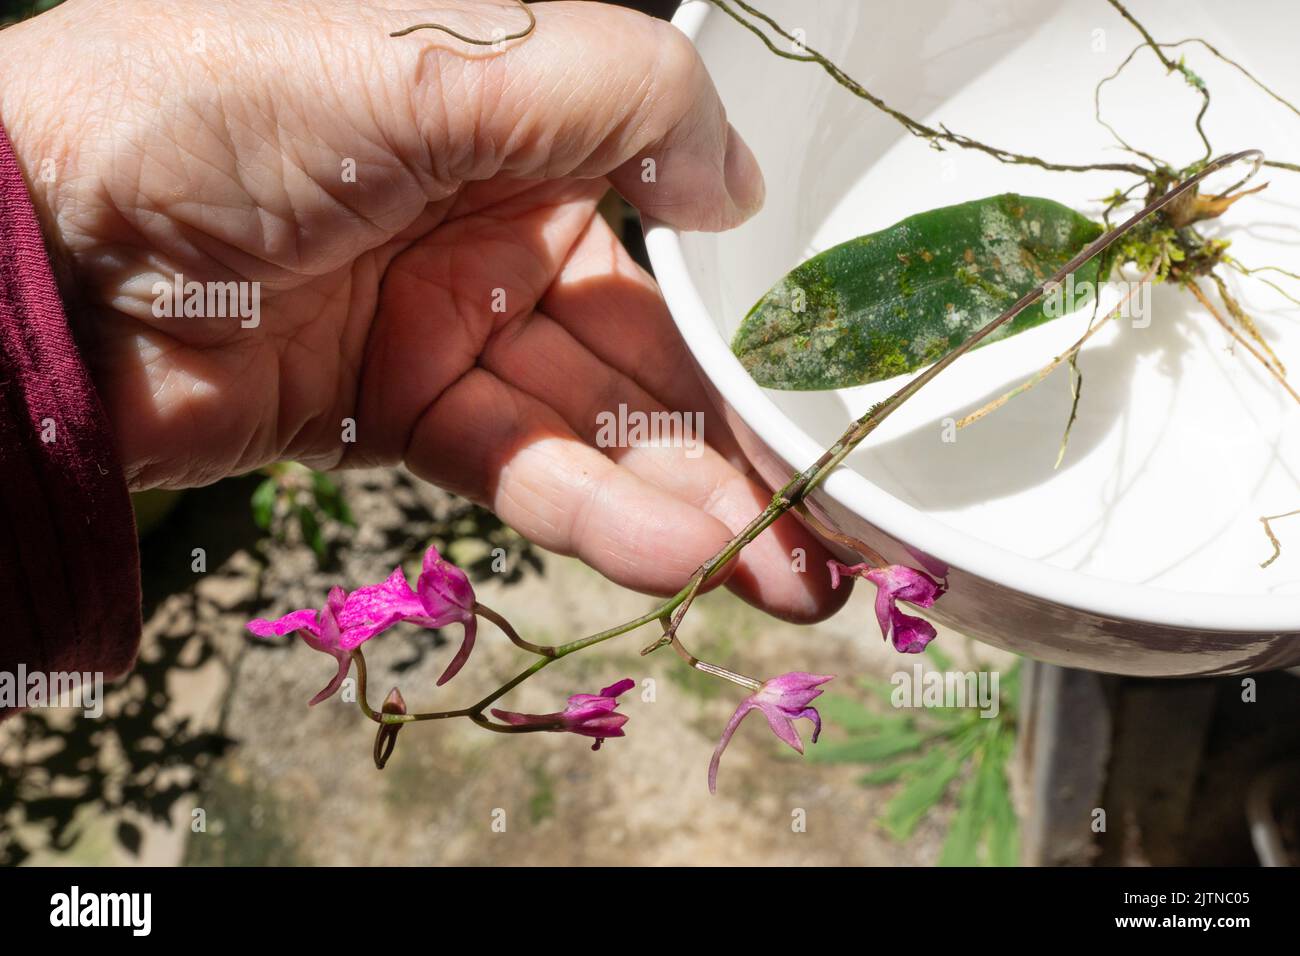 Comparettia falcata orchid plant being prepared for mounting by first soaking the plant in water. Stock Photo